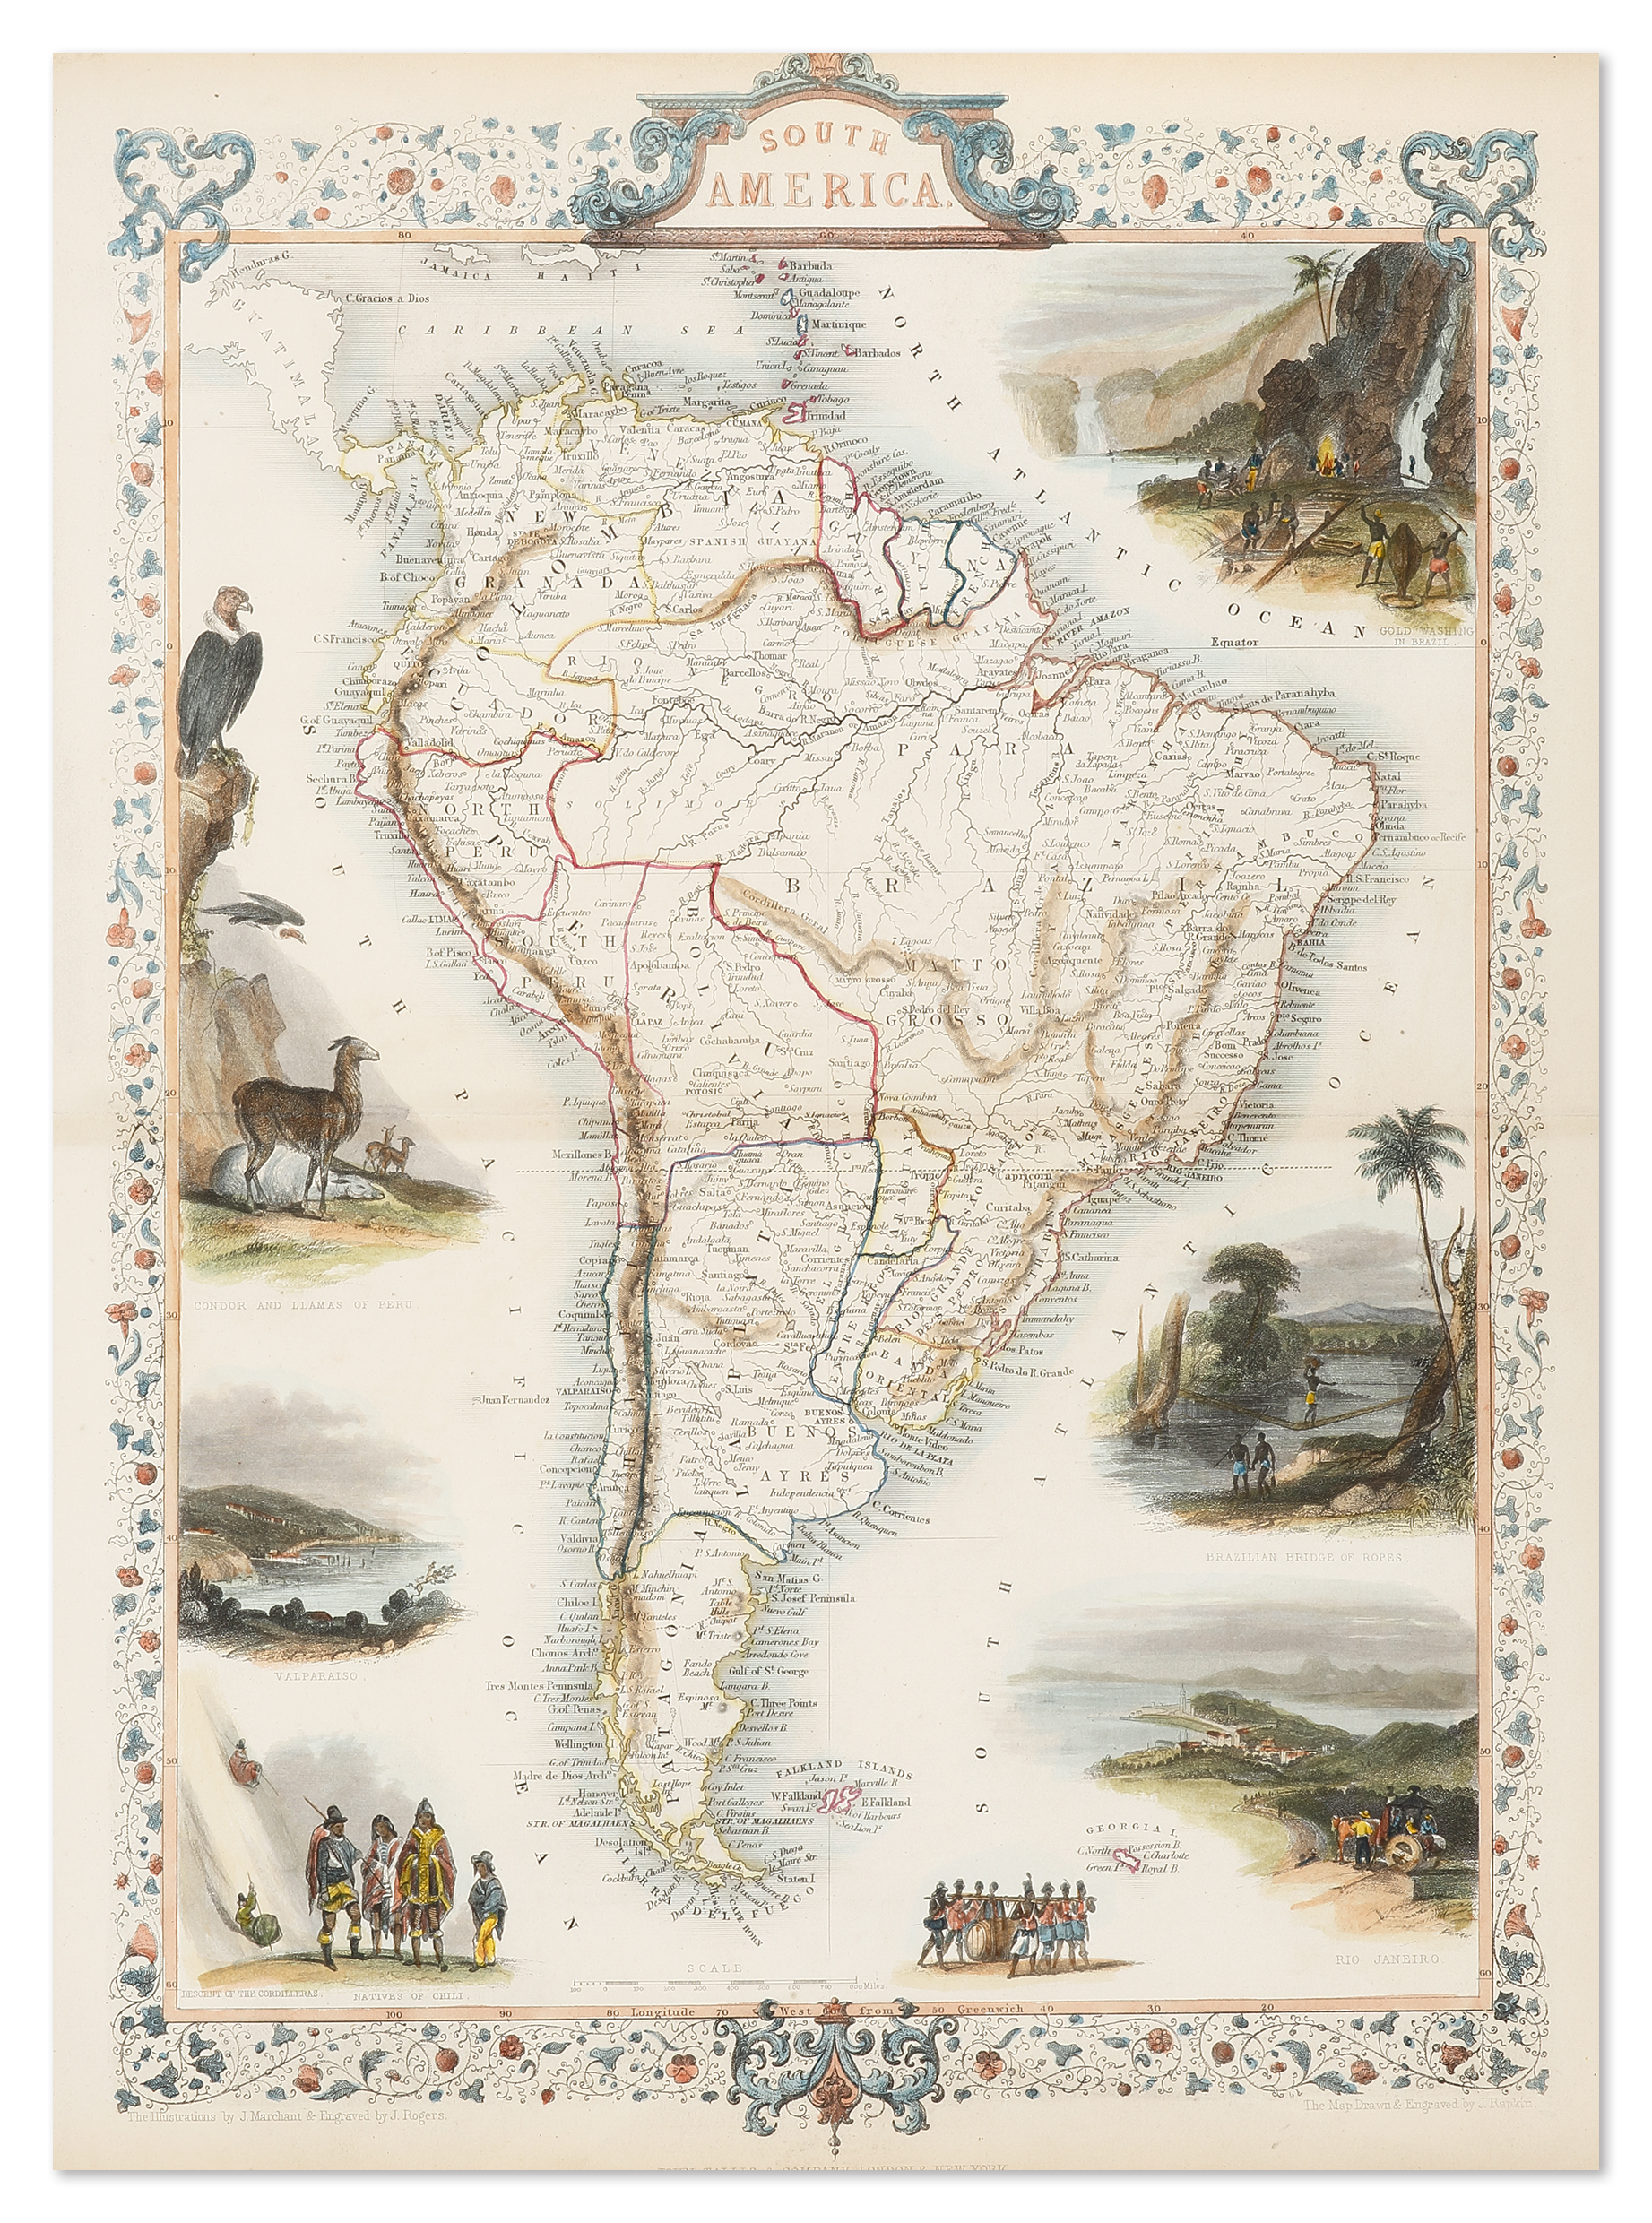 South America - Antique Print from 1854